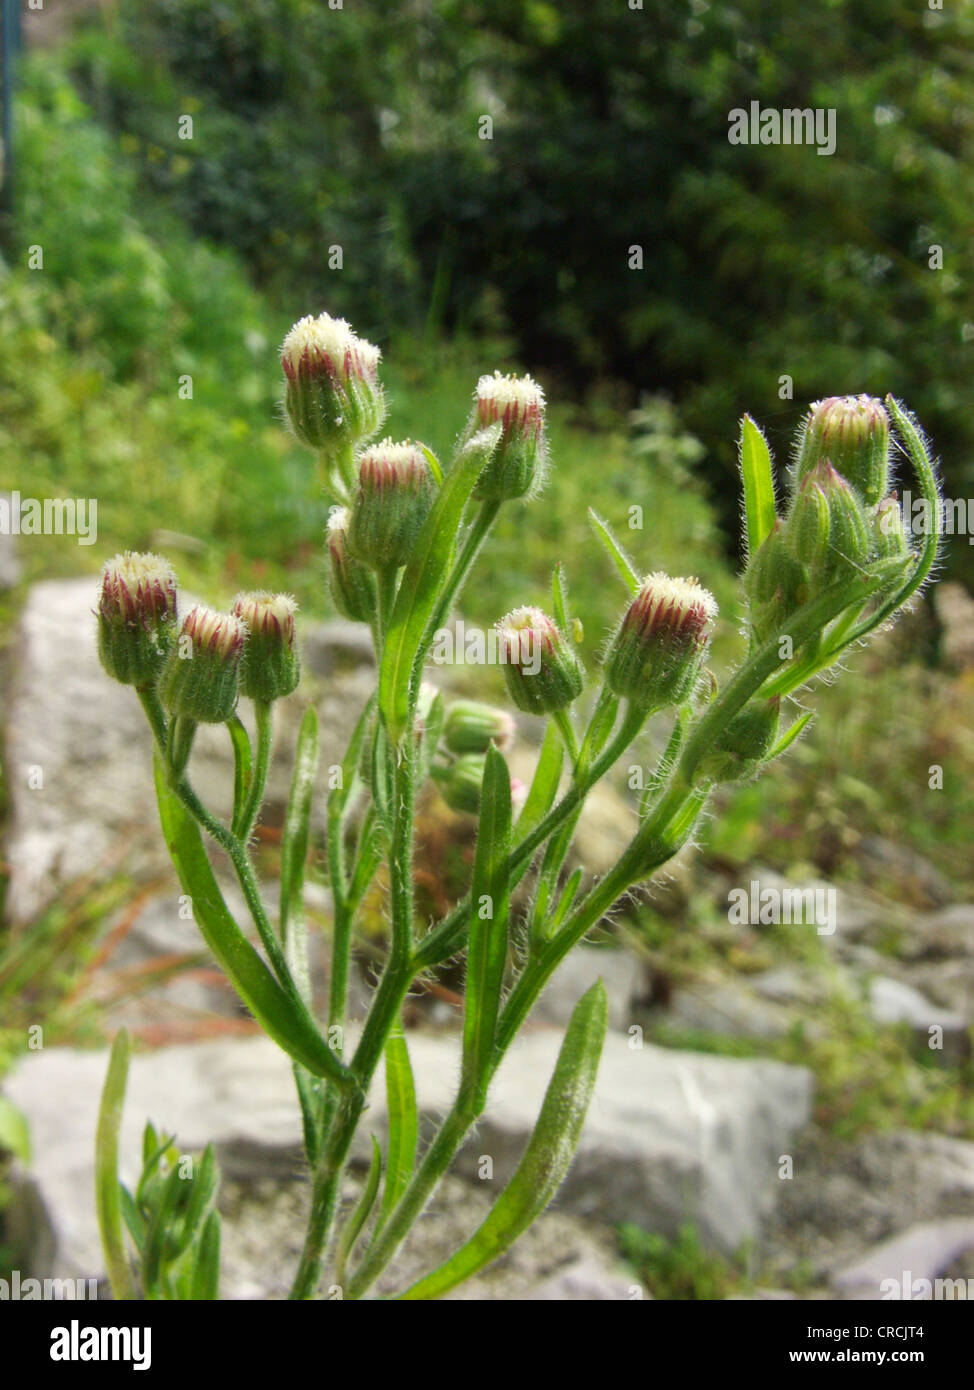 hairy fleabane, horse-weed, butter-weed, Canadian fleabane, South American conyza (Conyza bonariensis), blooming, Italy, Sicilia Stock Photo